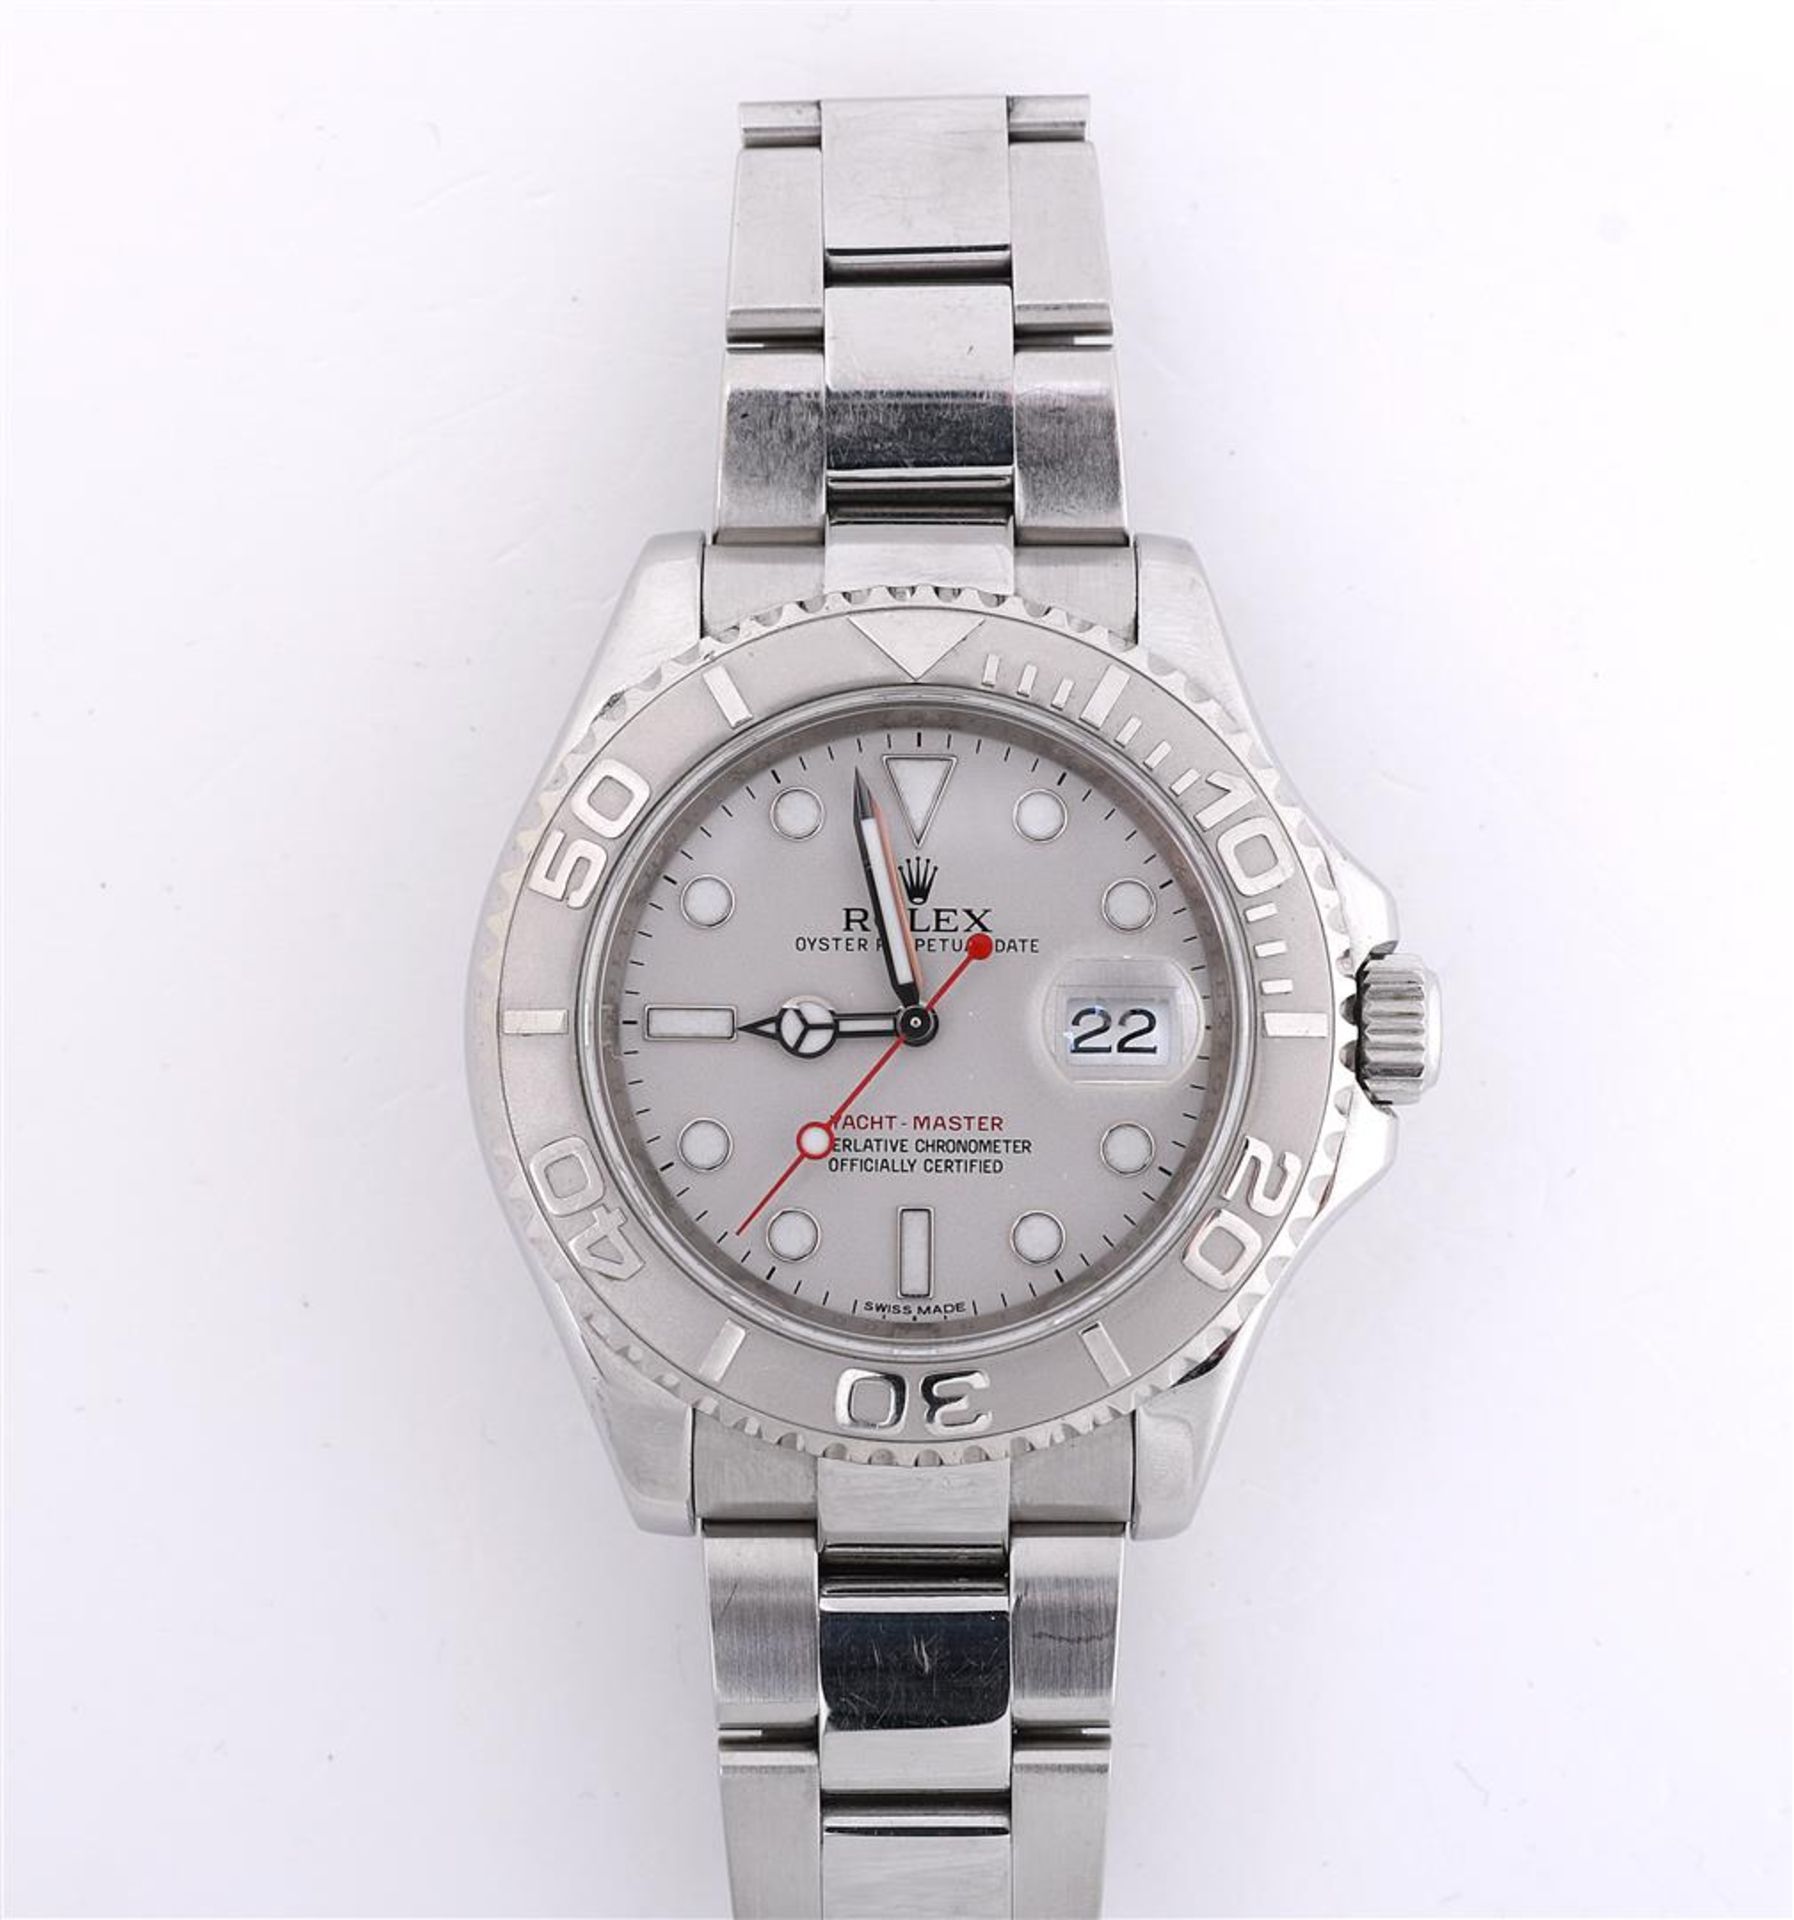 Rolex - Yacht-Master - 168622 - Unisex - 2000-2010. 40 MM.
Including box and papers. 
Runs properly.